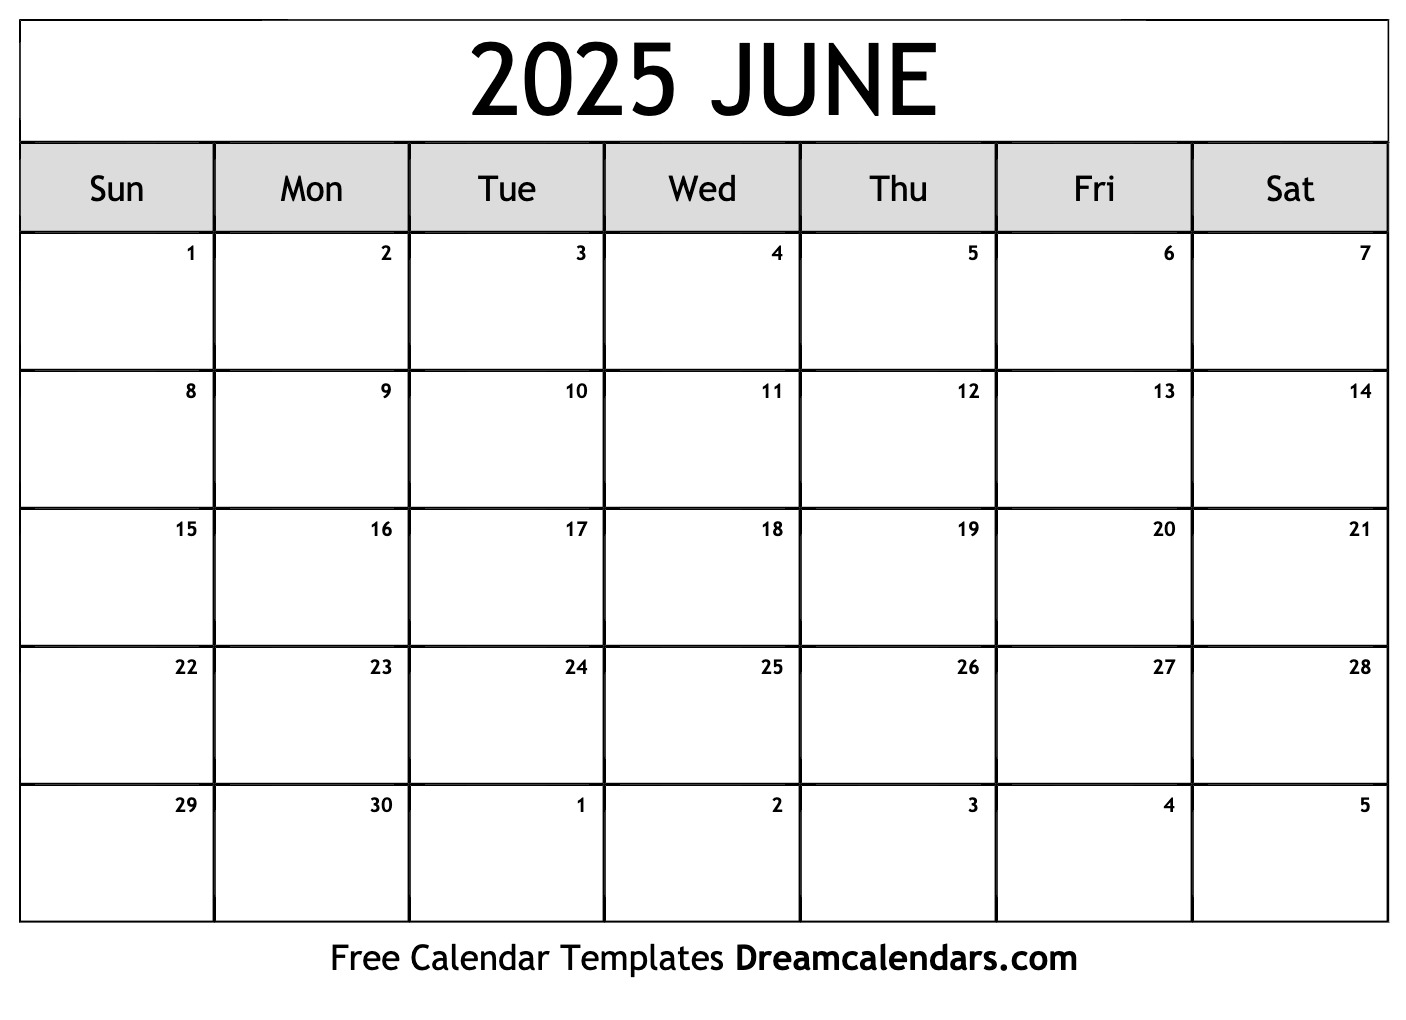 June 2025 Calendar - Free Printable with Holidays and Observances